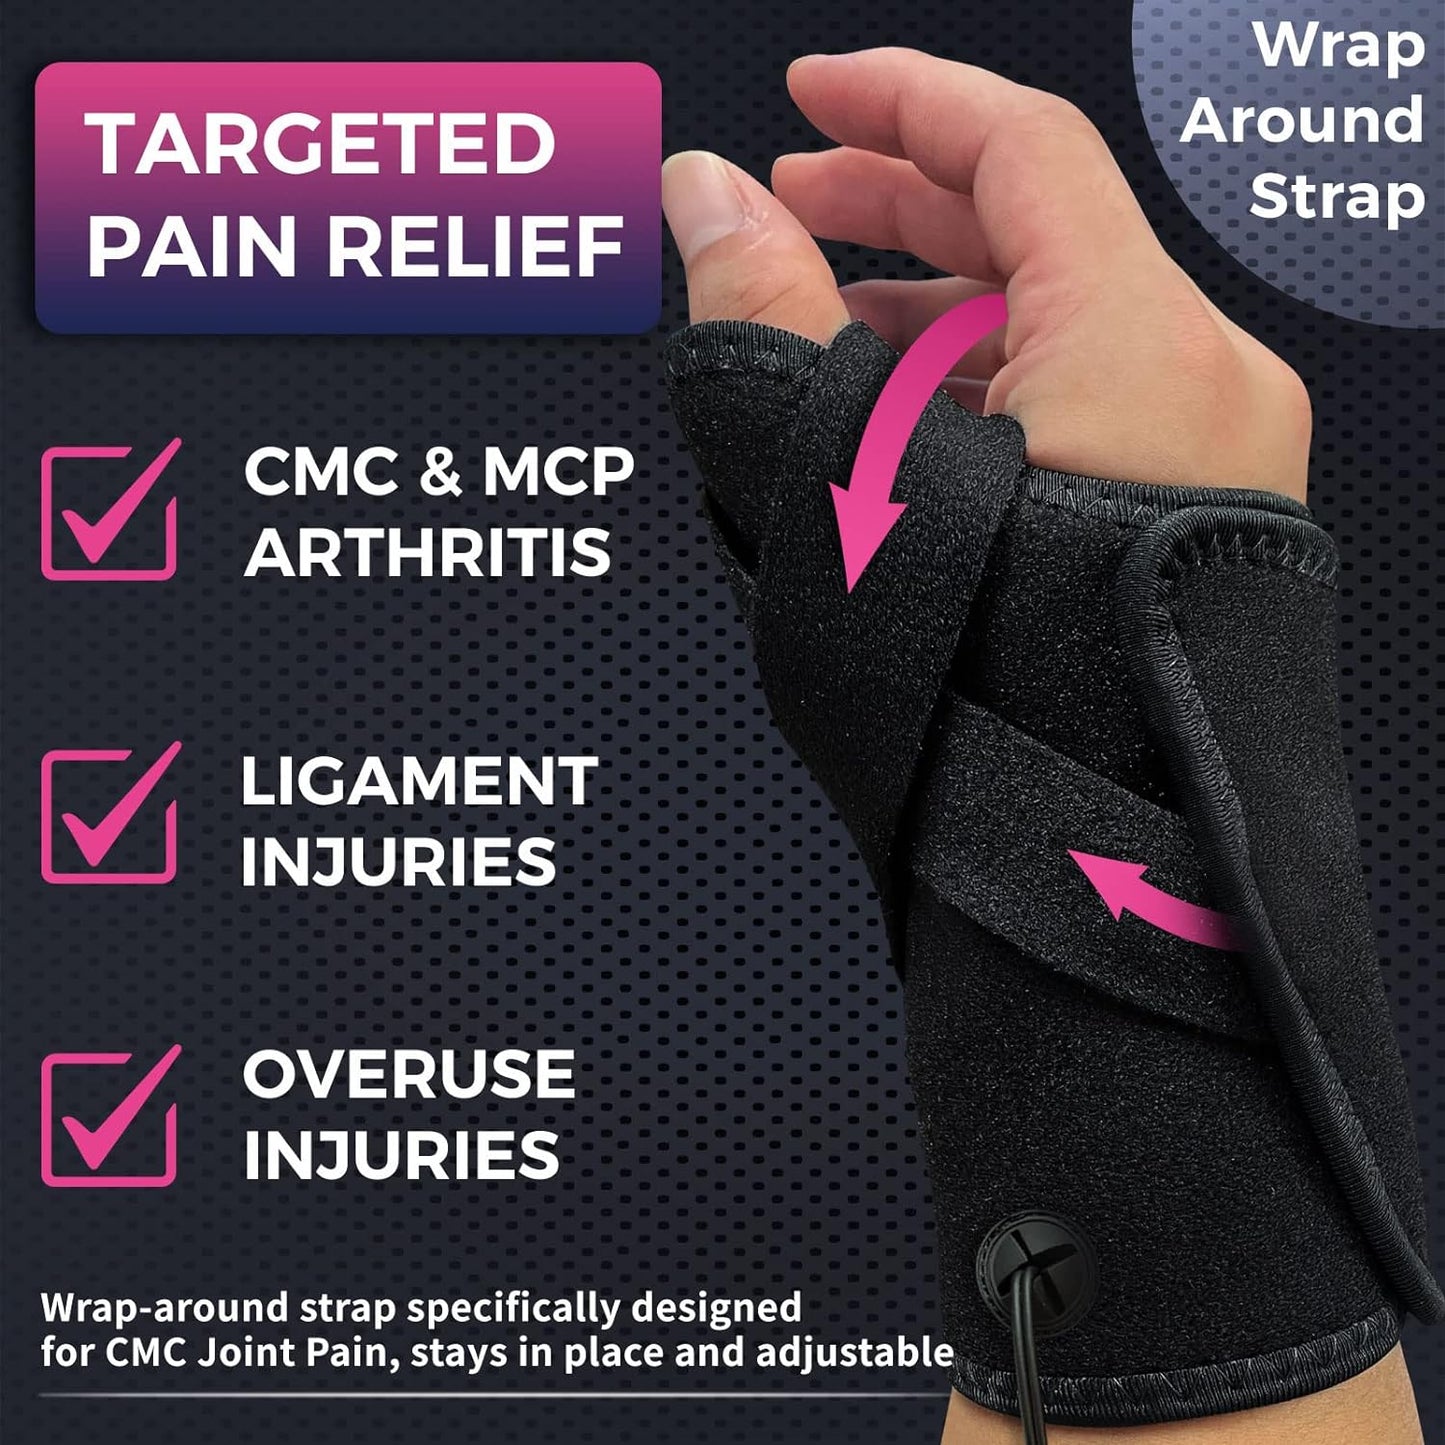 Hand Heating Pad for CMC Joint Thumb Arthritis, Heated Wrap Brace Splint Provides Support and Compression for Right Left Hand. Helps Men Women with Carpal Tunnel Relief, Wrist Pain, Tendonitis